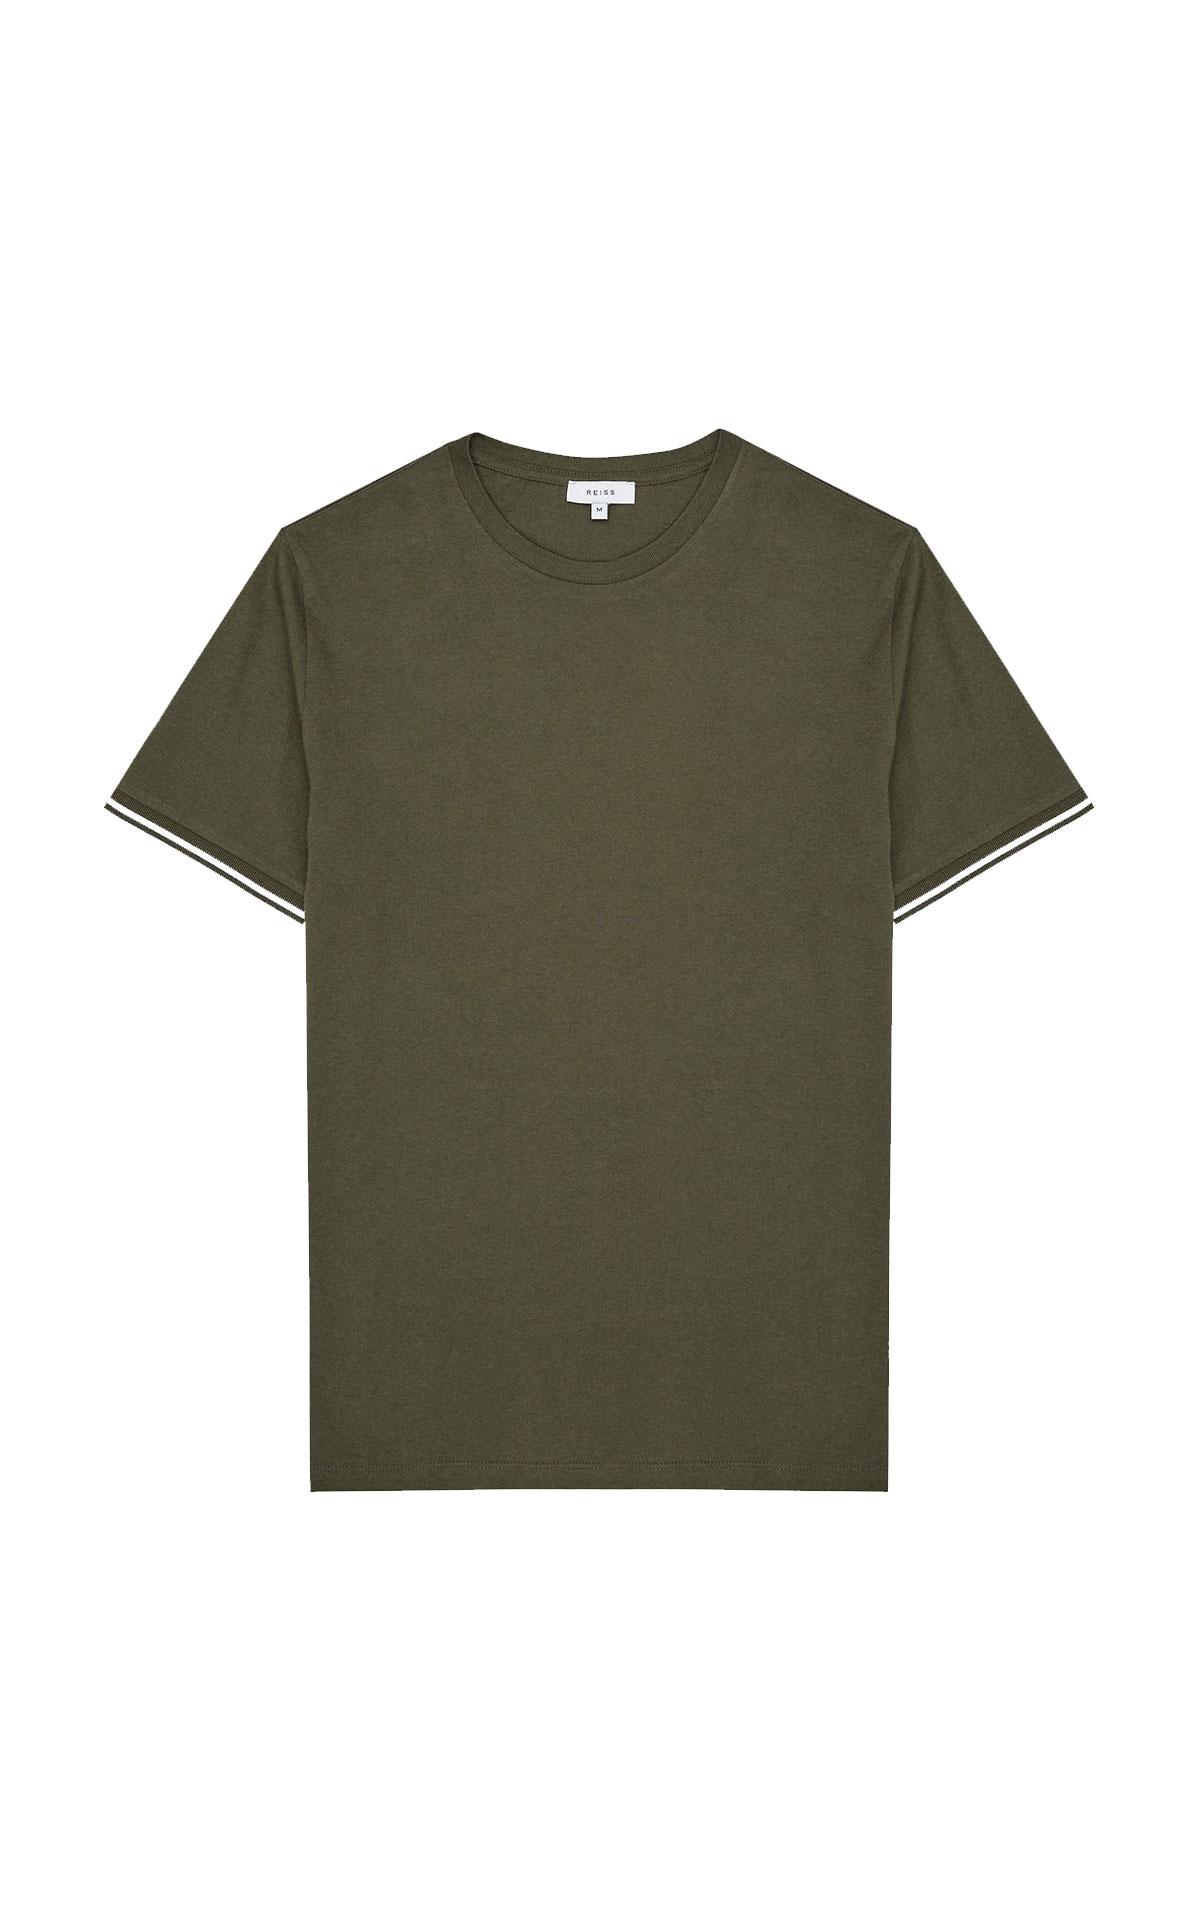 Reiss Harrison army green t-shirt from Bicester Village